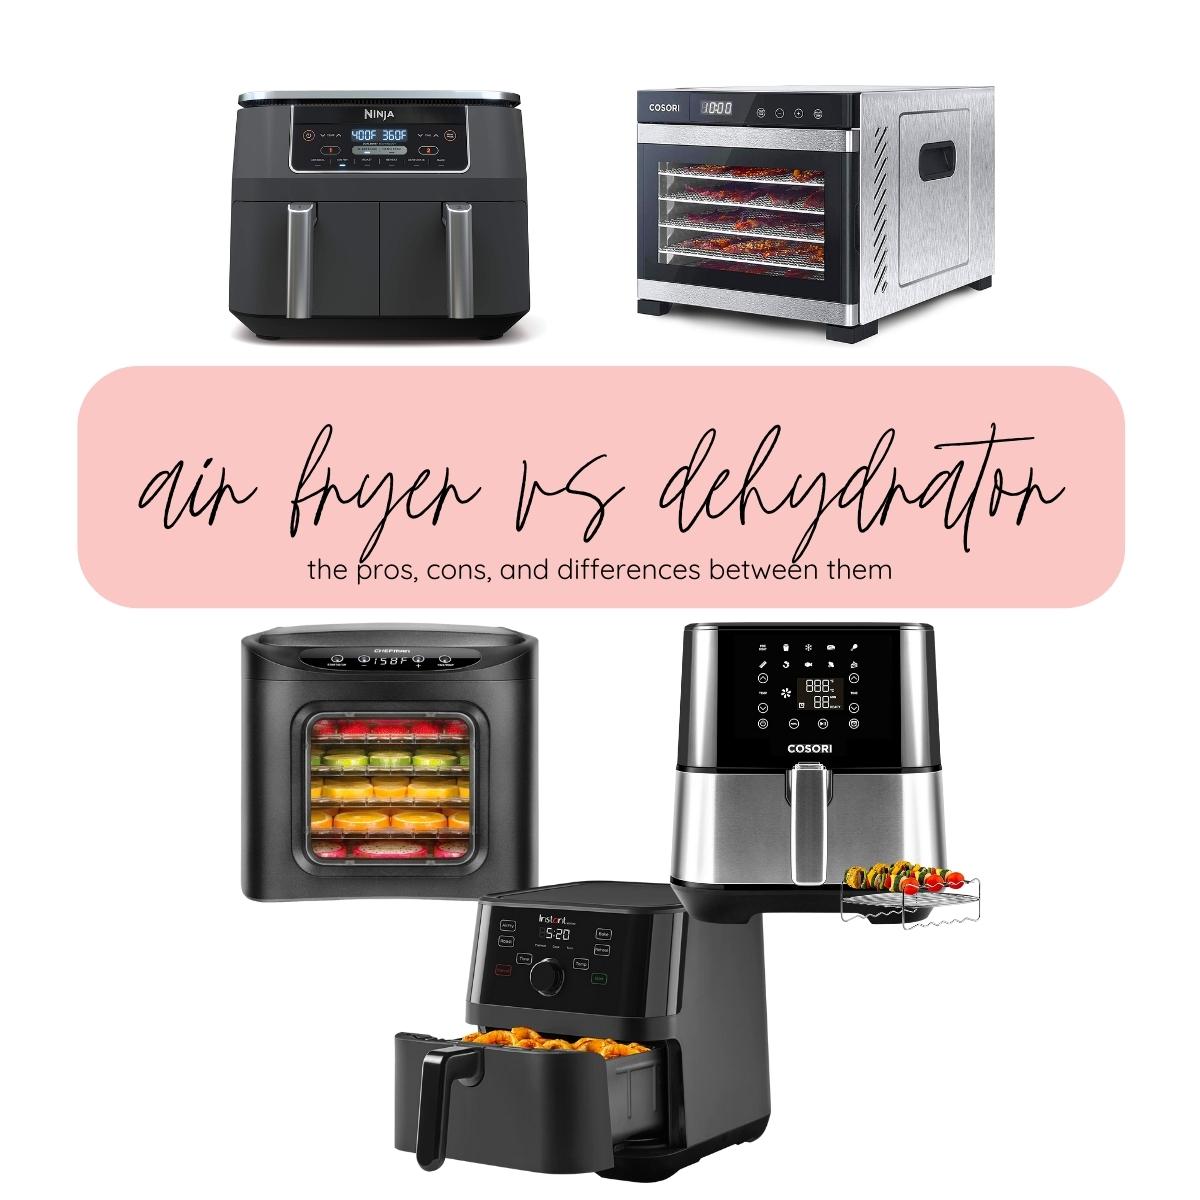 Food Dehydrator Vs. Oven: Which Is Better?